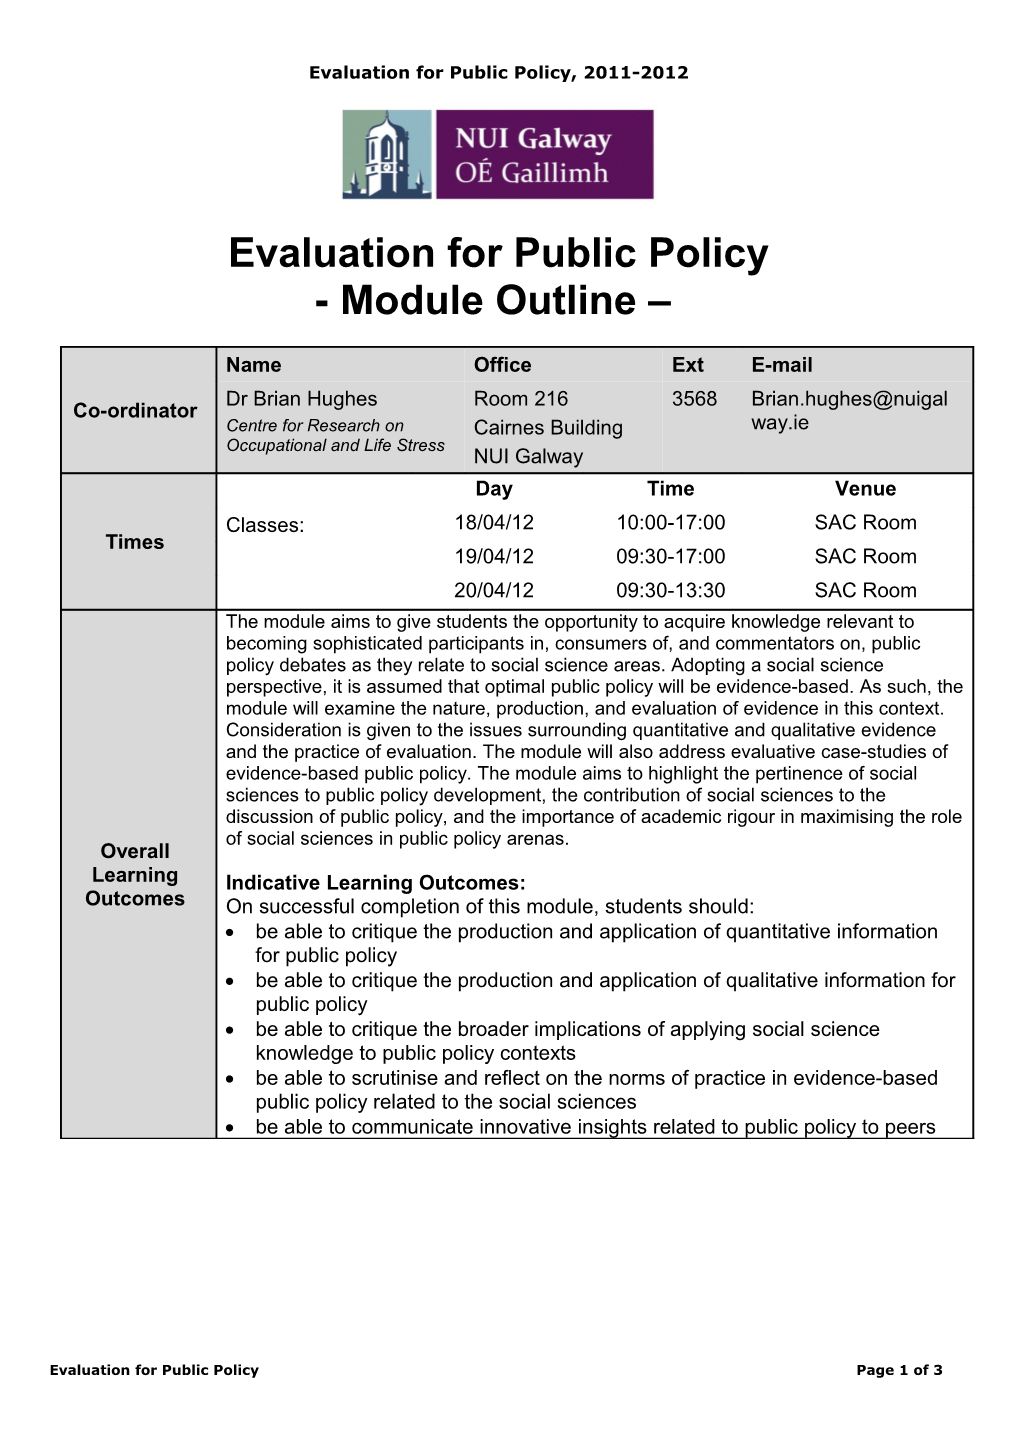 Evaluation for Public Policy, 2011-2012